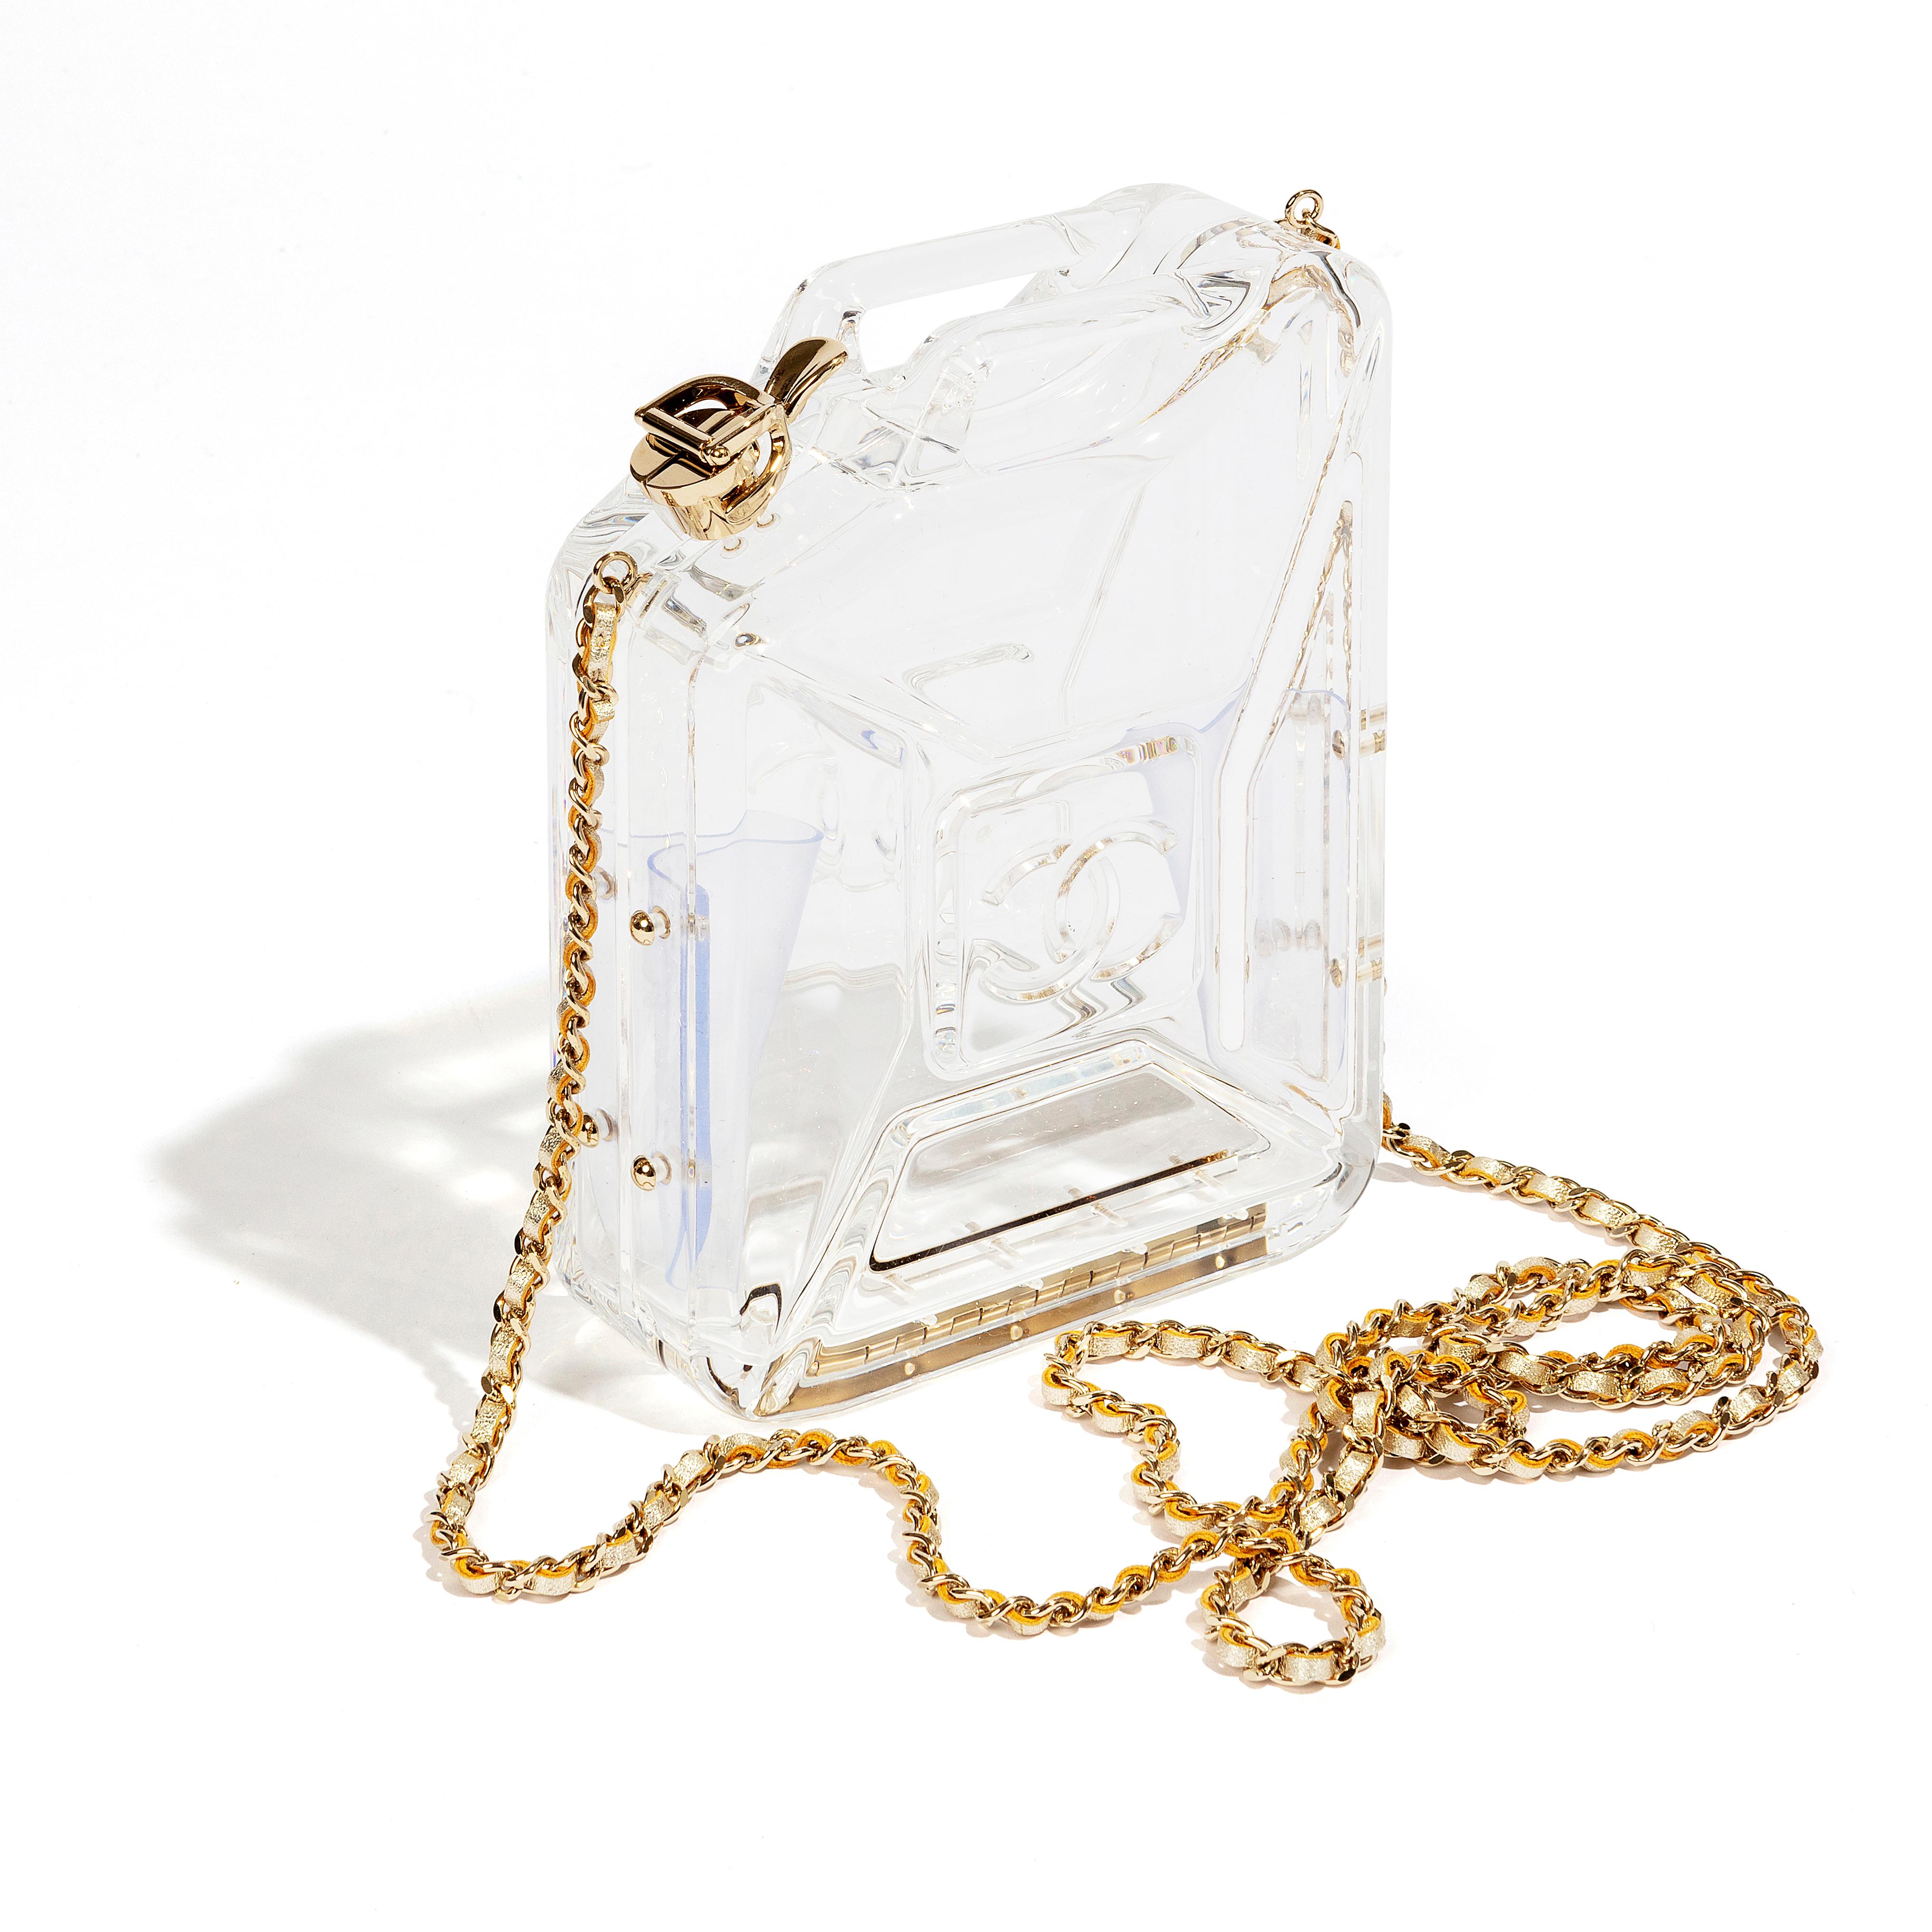 Chanel Dubai Tank Transparent Minaudiere Clutch Bag In New Condition For Sale In London, GB